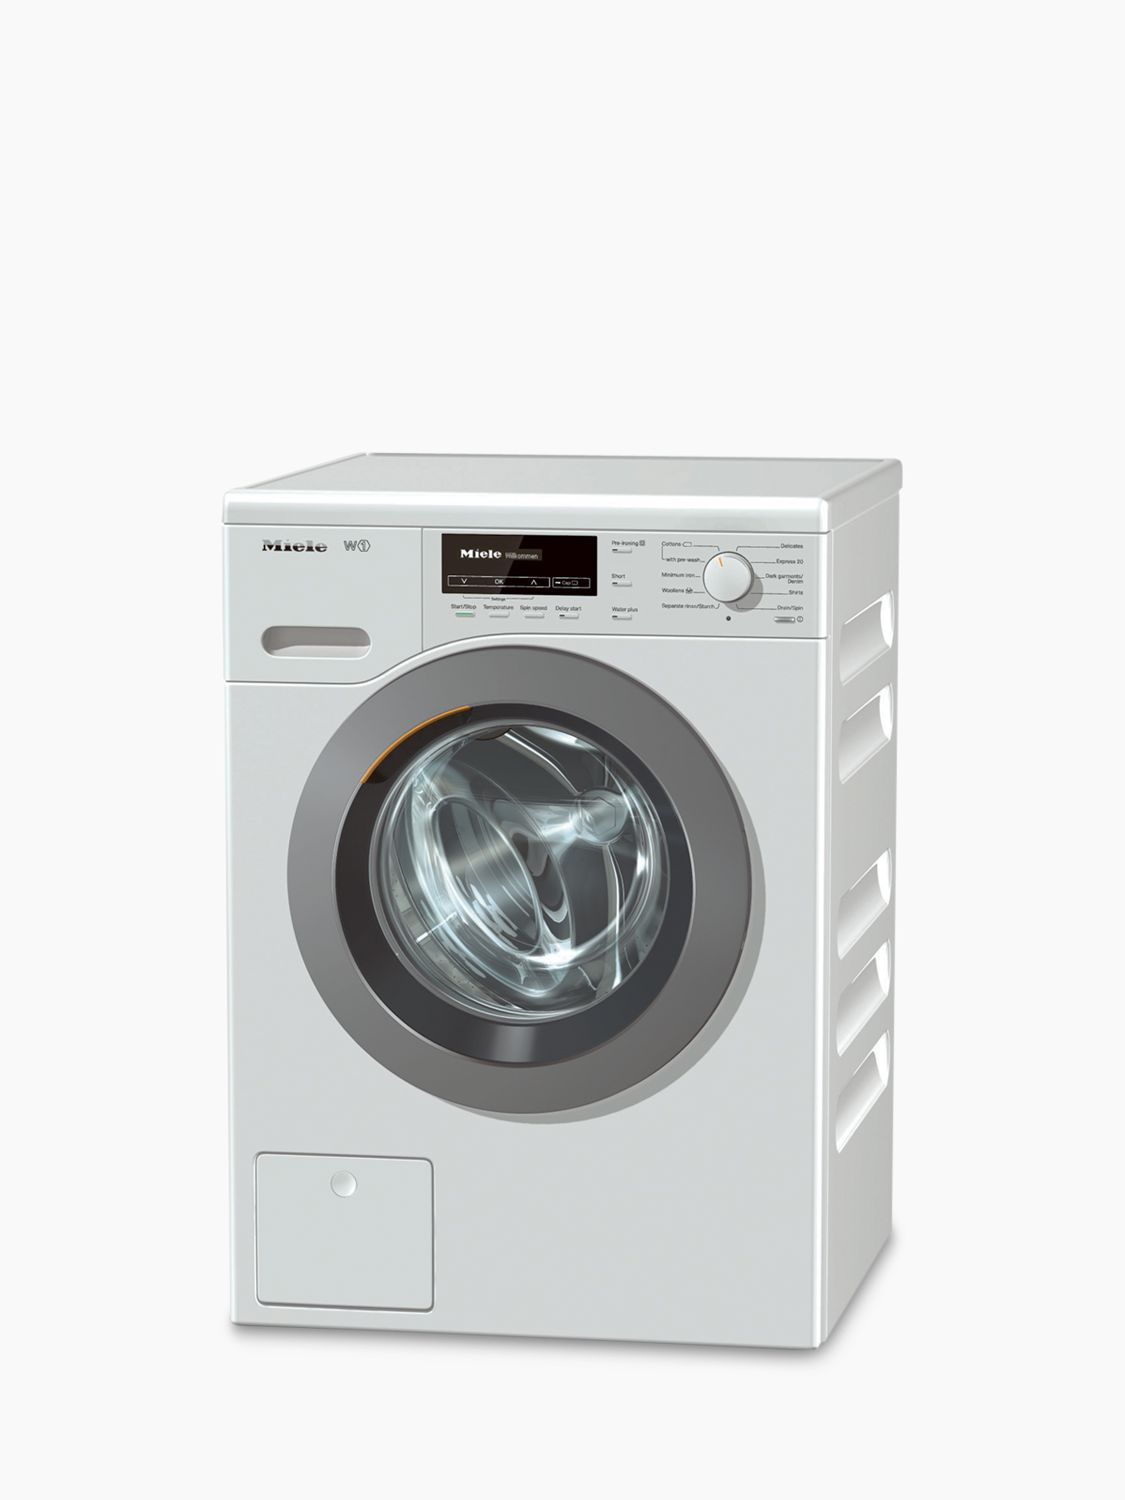 Miele WKB 120 Freestanding Washing Machine, 8kg Load, A+++ Energy Rating, 1600rpm Spin, White